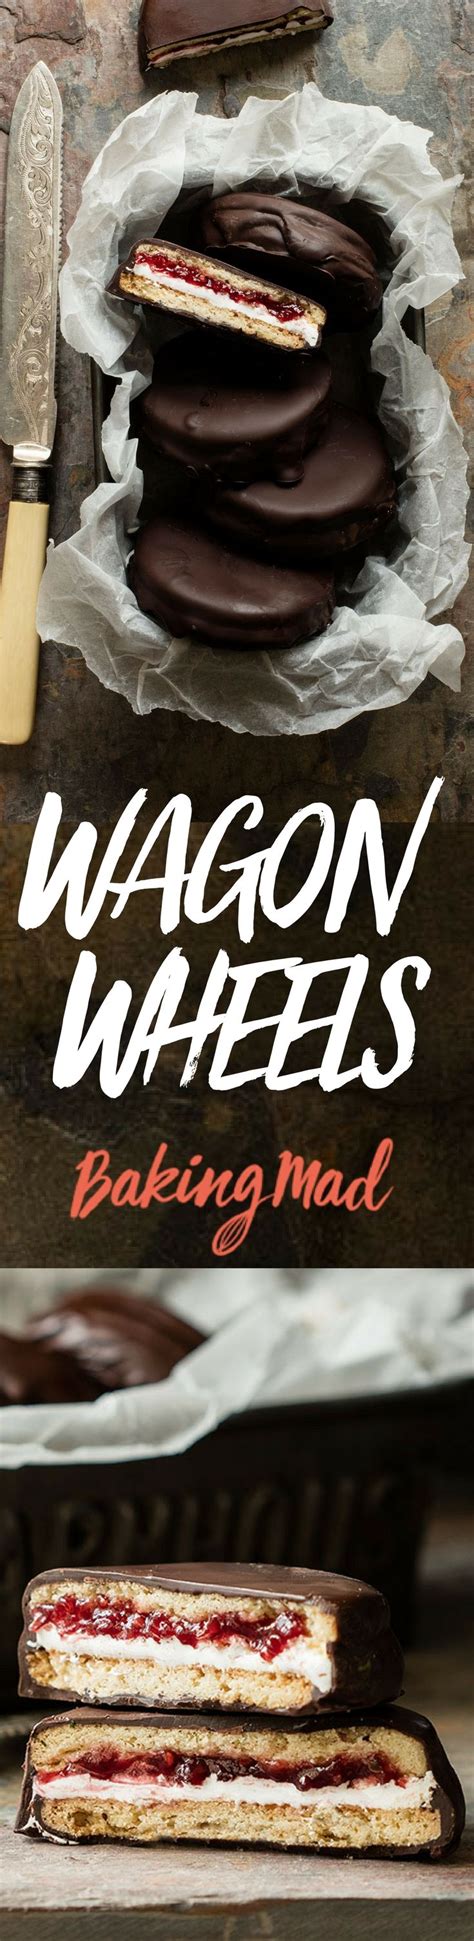 This Recipe Is For Homemade Wagon Wheels Take Us Back To Our Youth